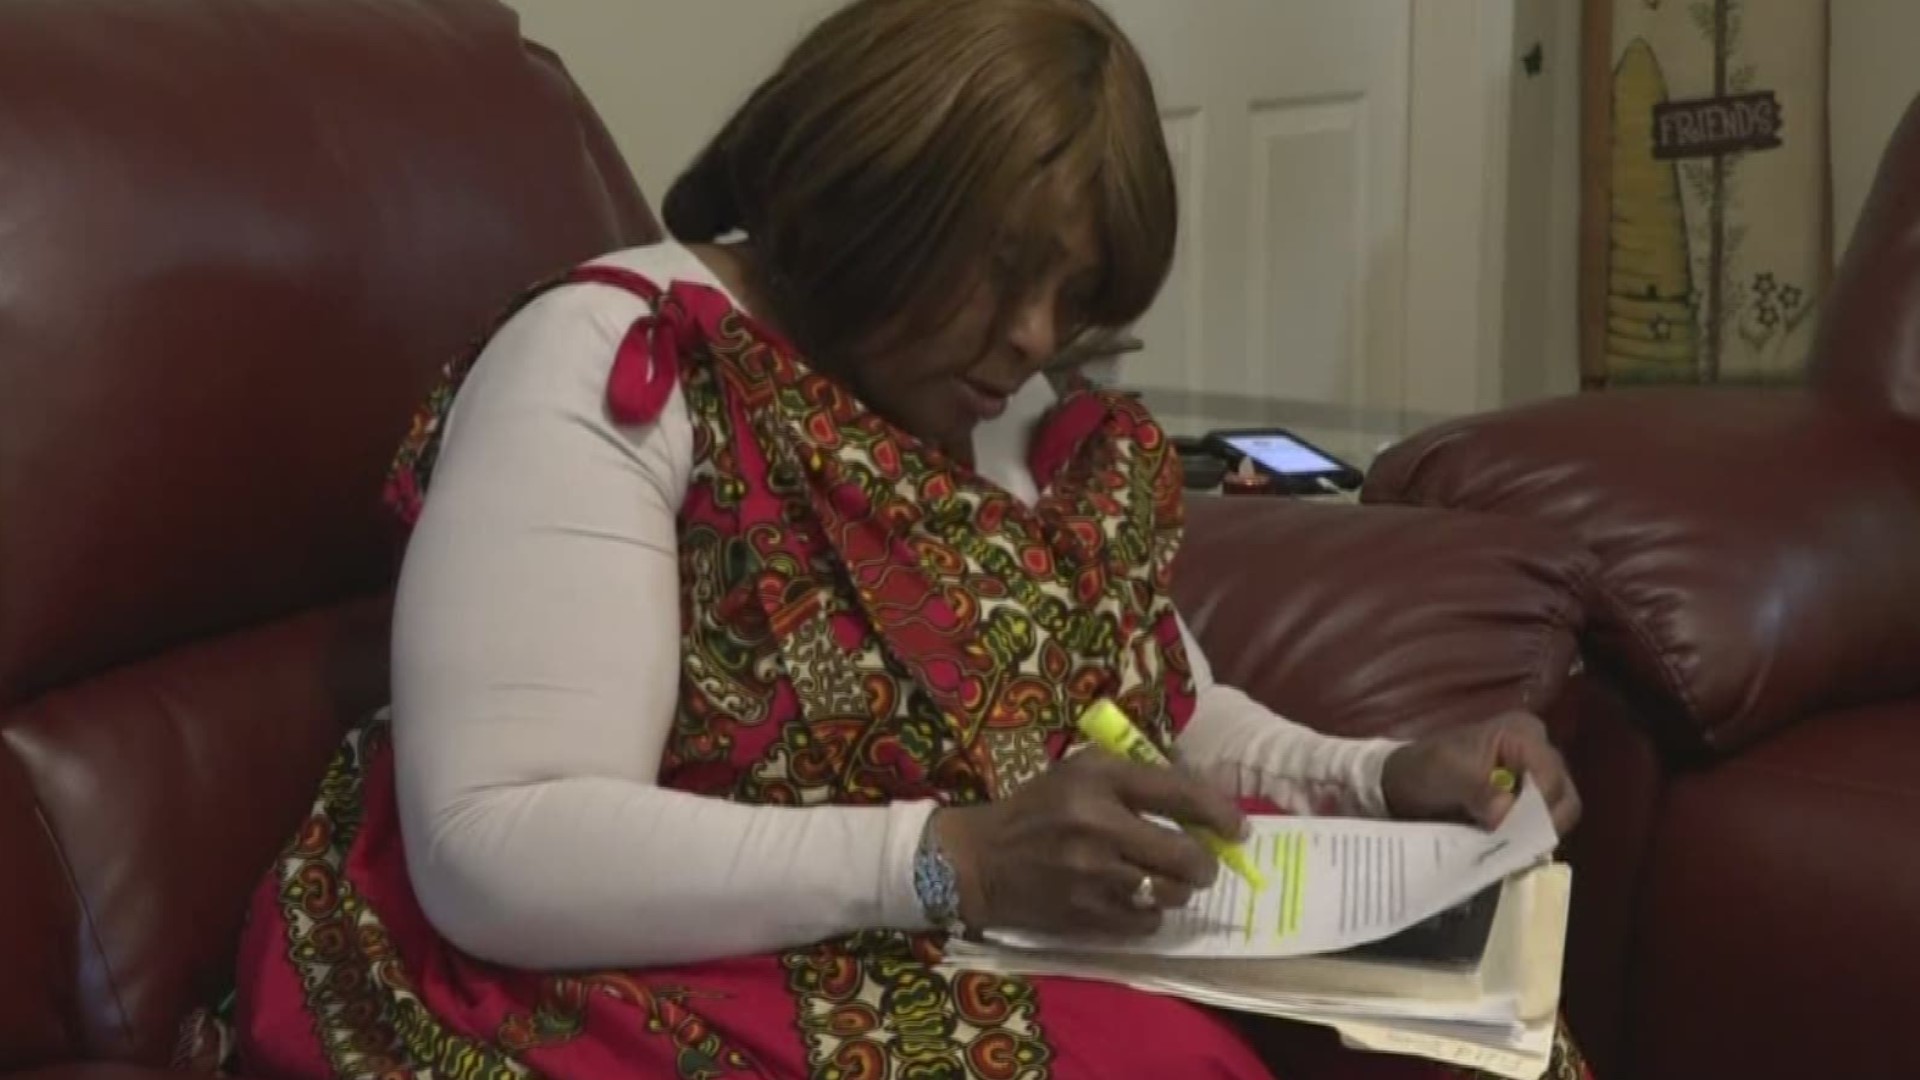 A DeKalb County teacher says two slip and falls on the job put her out of work.